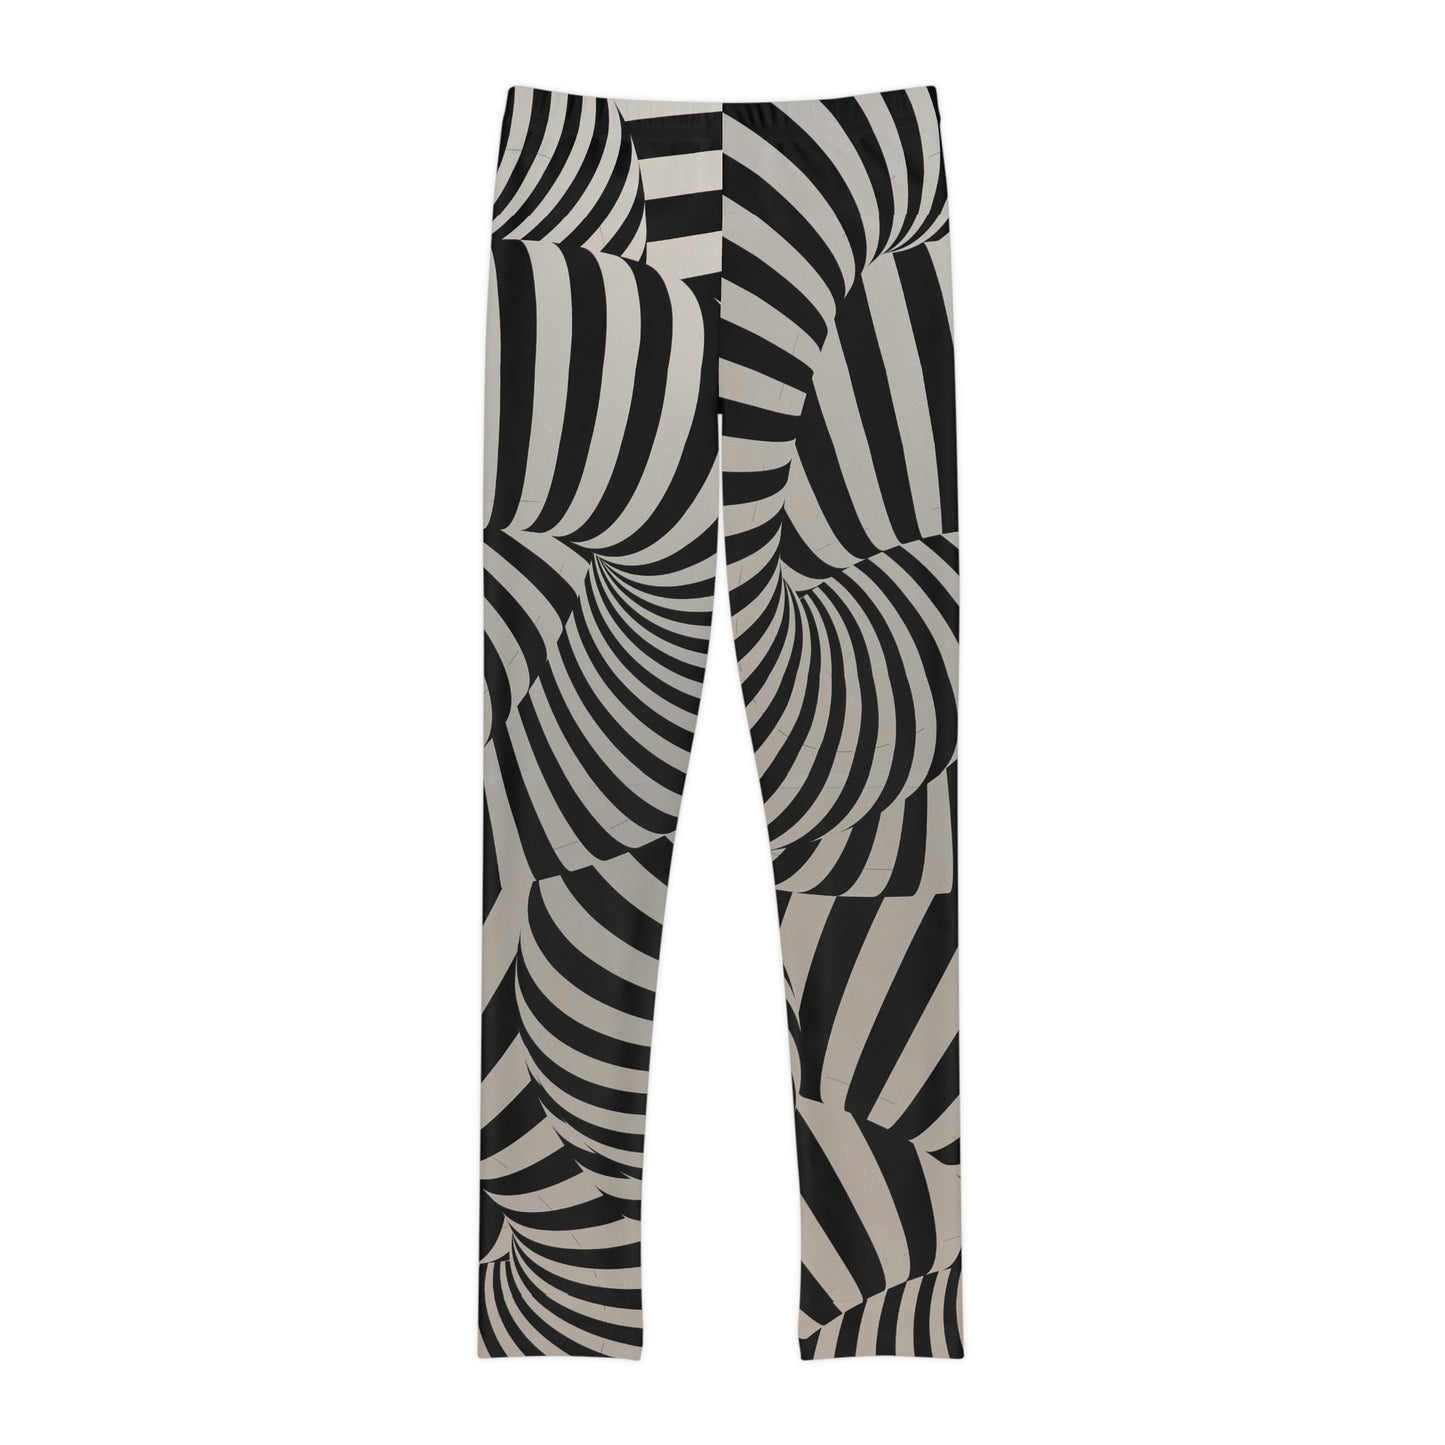 Zebra Print animal kingdom, Safari Youth Leggings, One of a Kind Gift - Unique Workout Activewear tights for kids, Daughter, Niece Christmas Gift